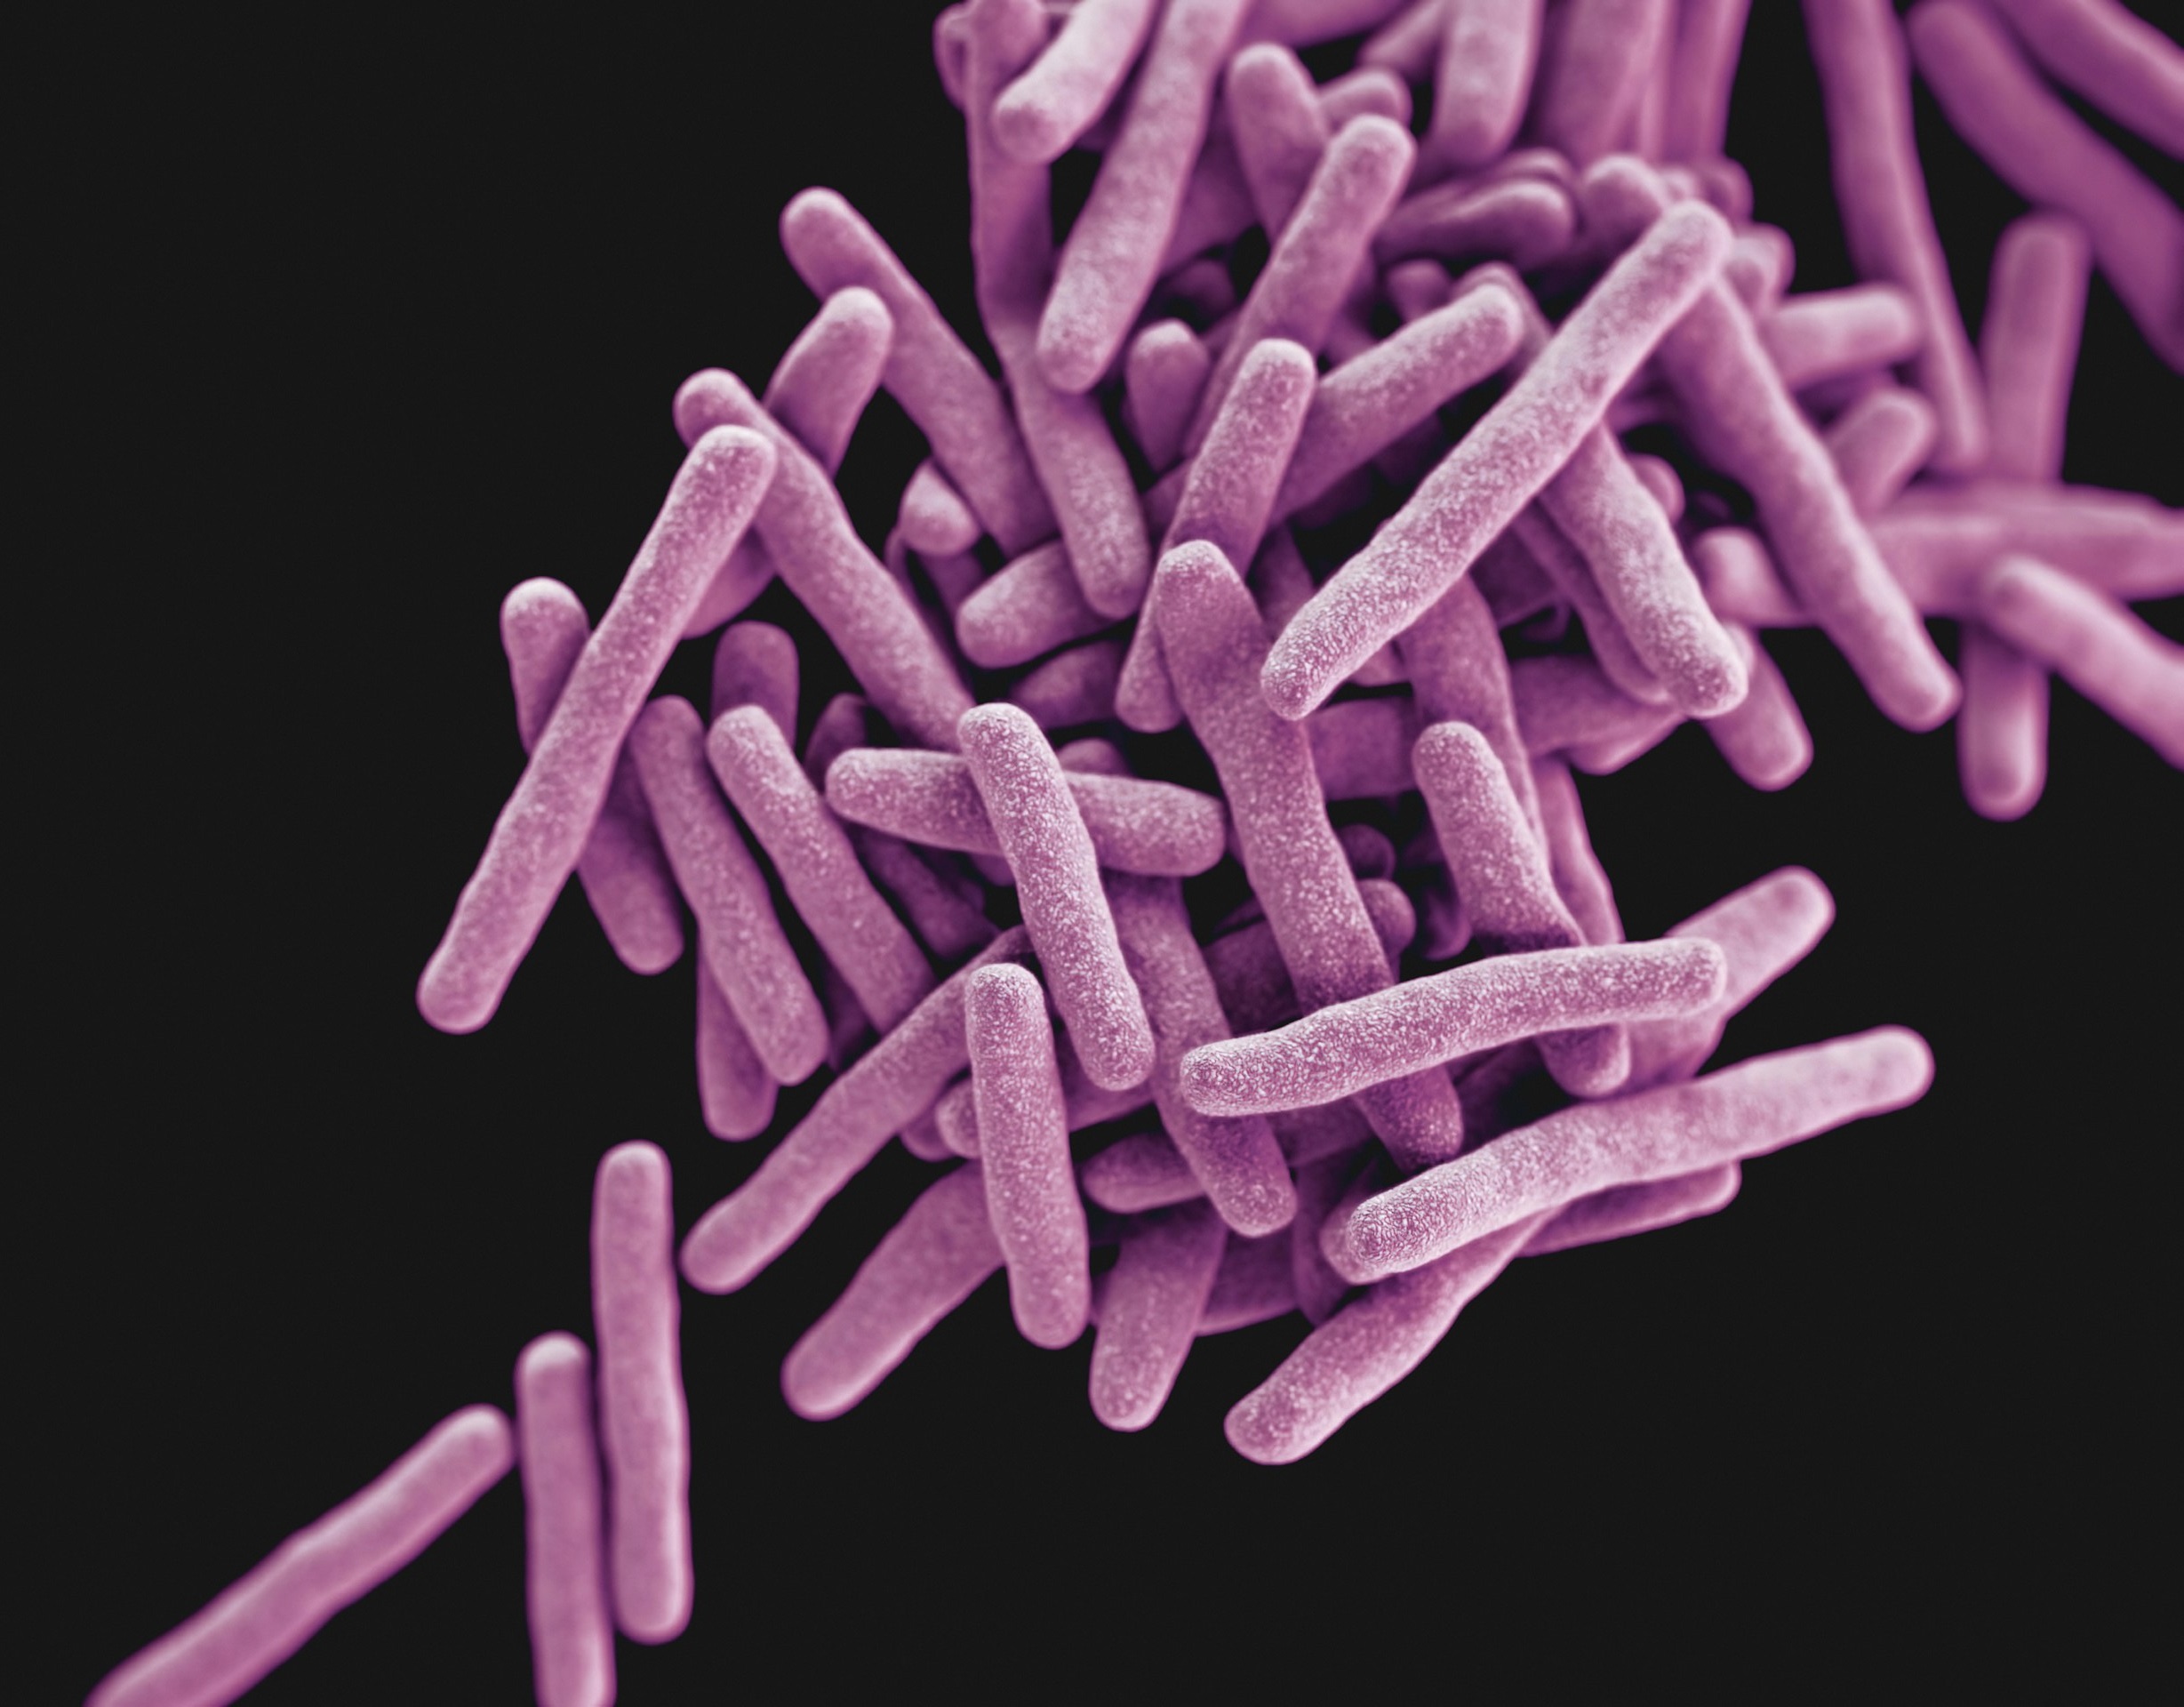 Tuberculosis: towards future biomarkers for assessing infectivity